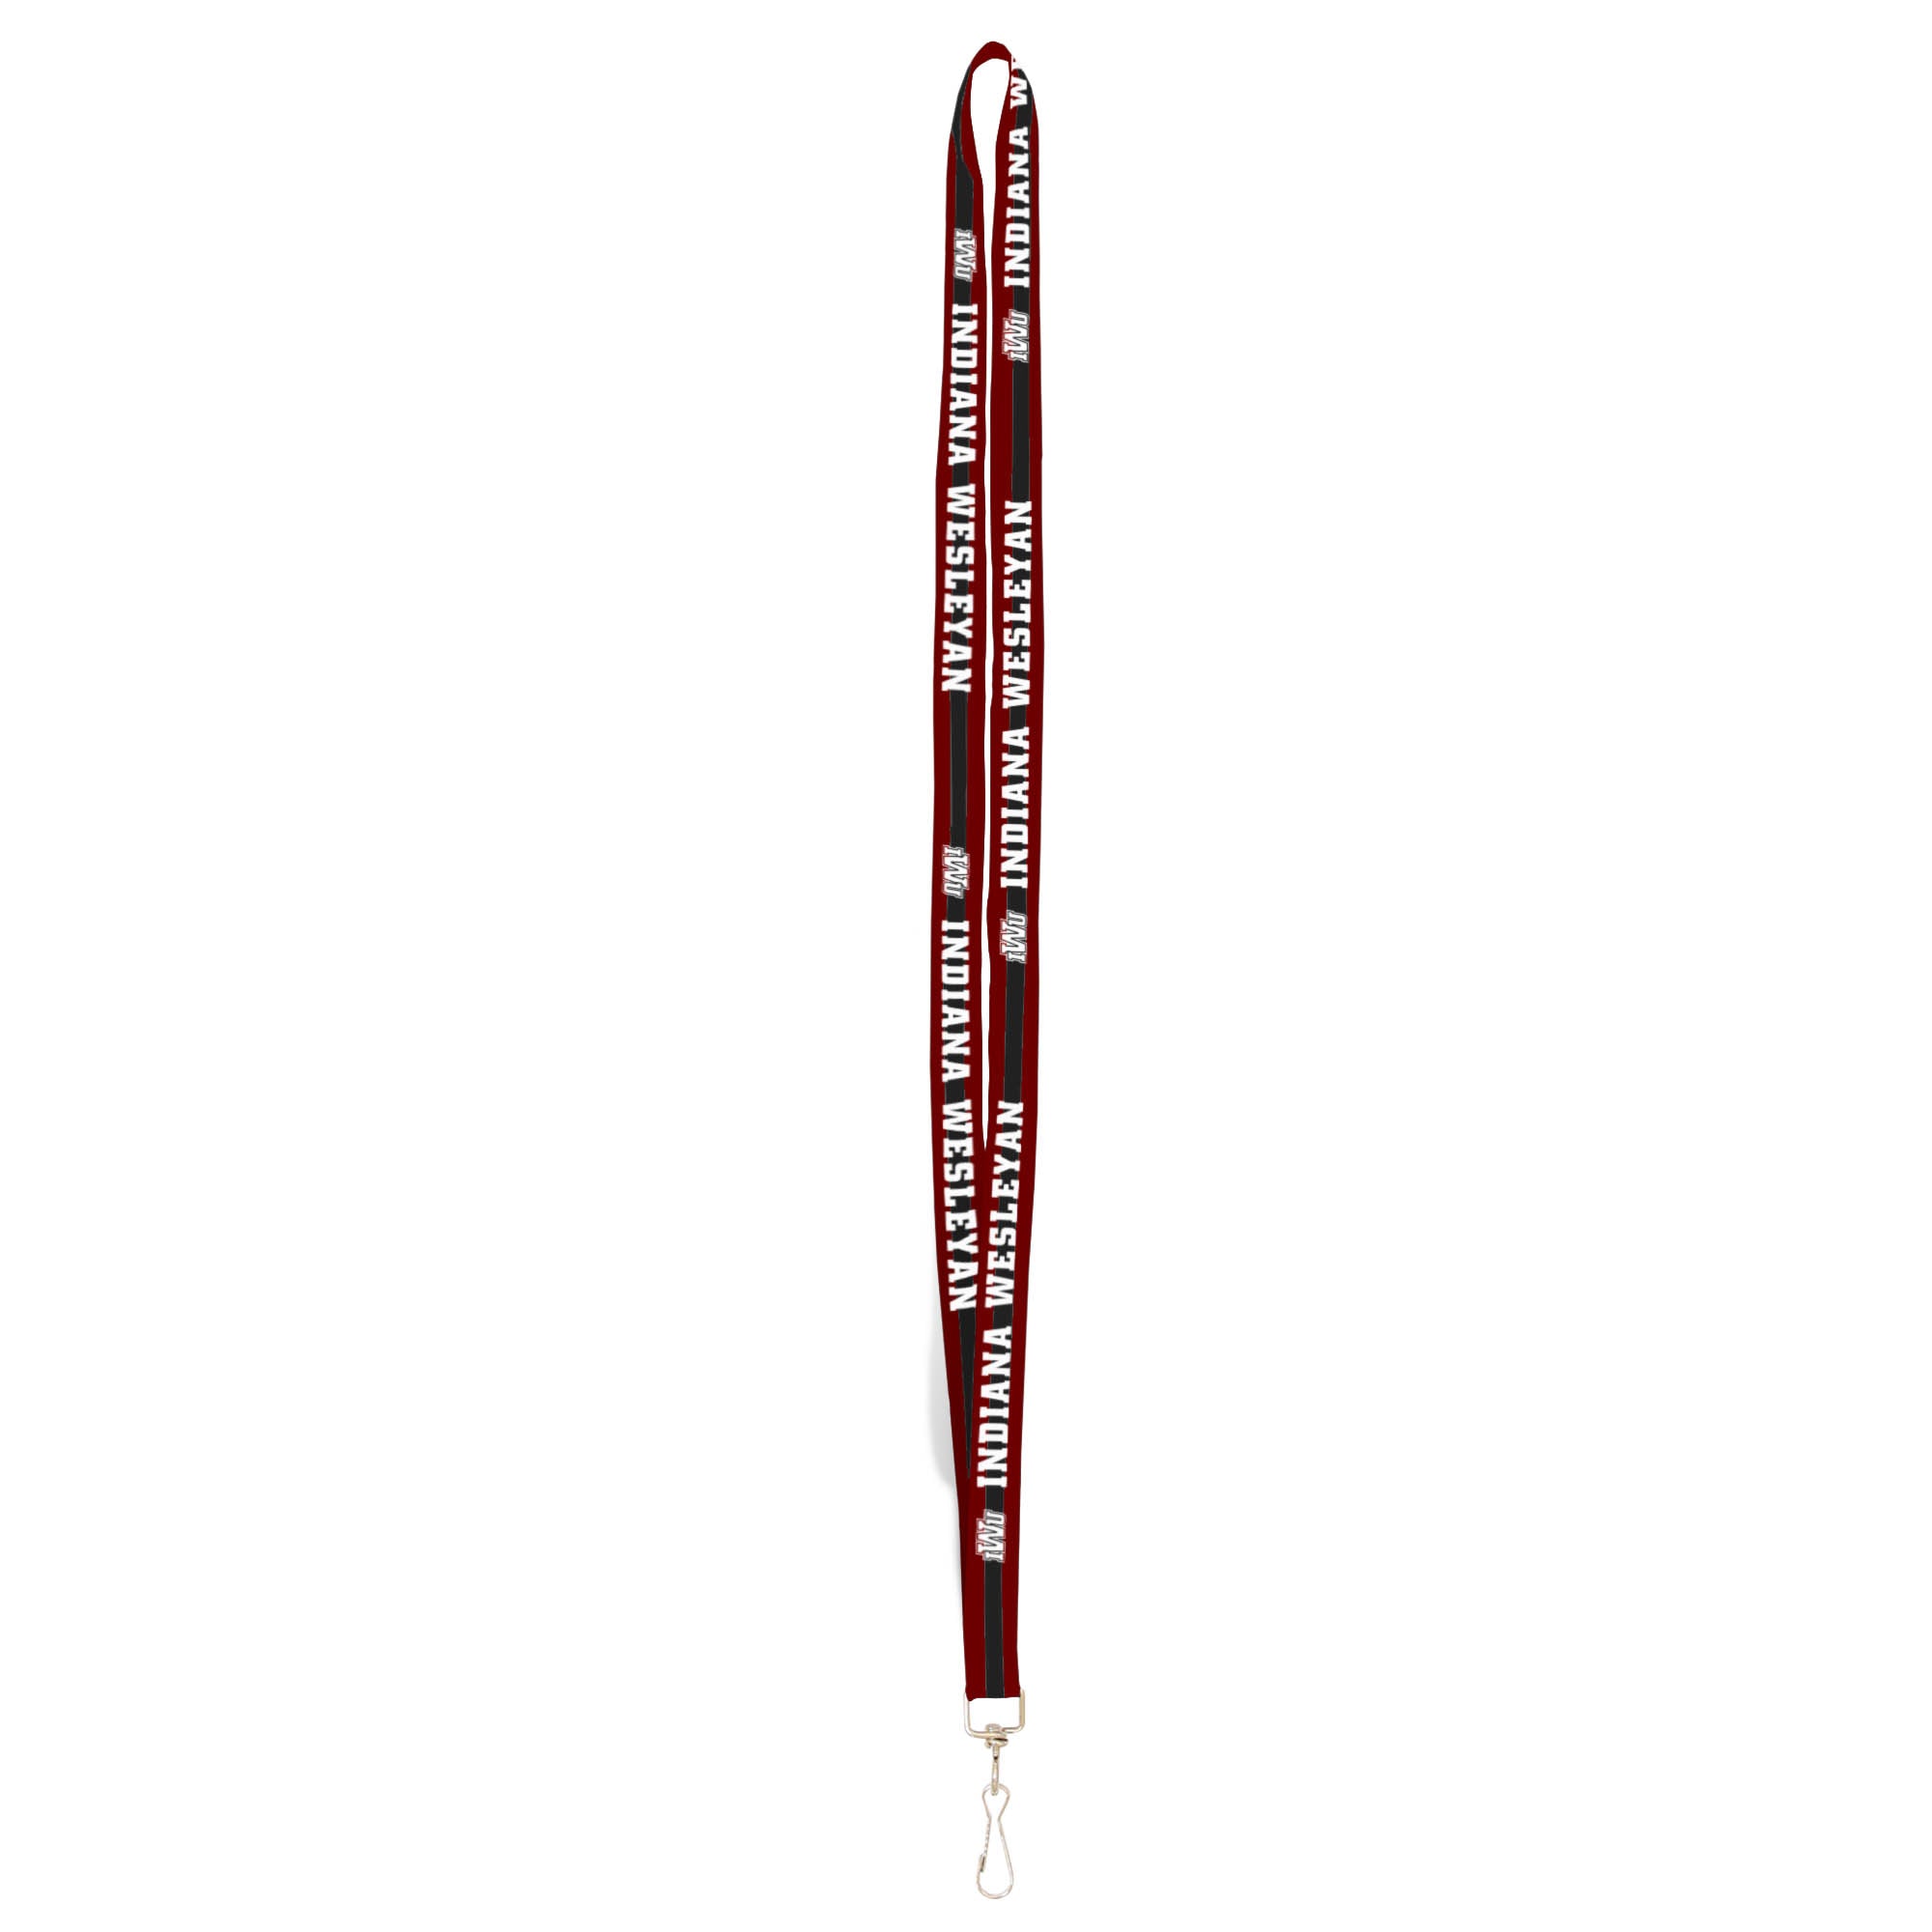 Indiana College Lanyard With Swivel Clip 